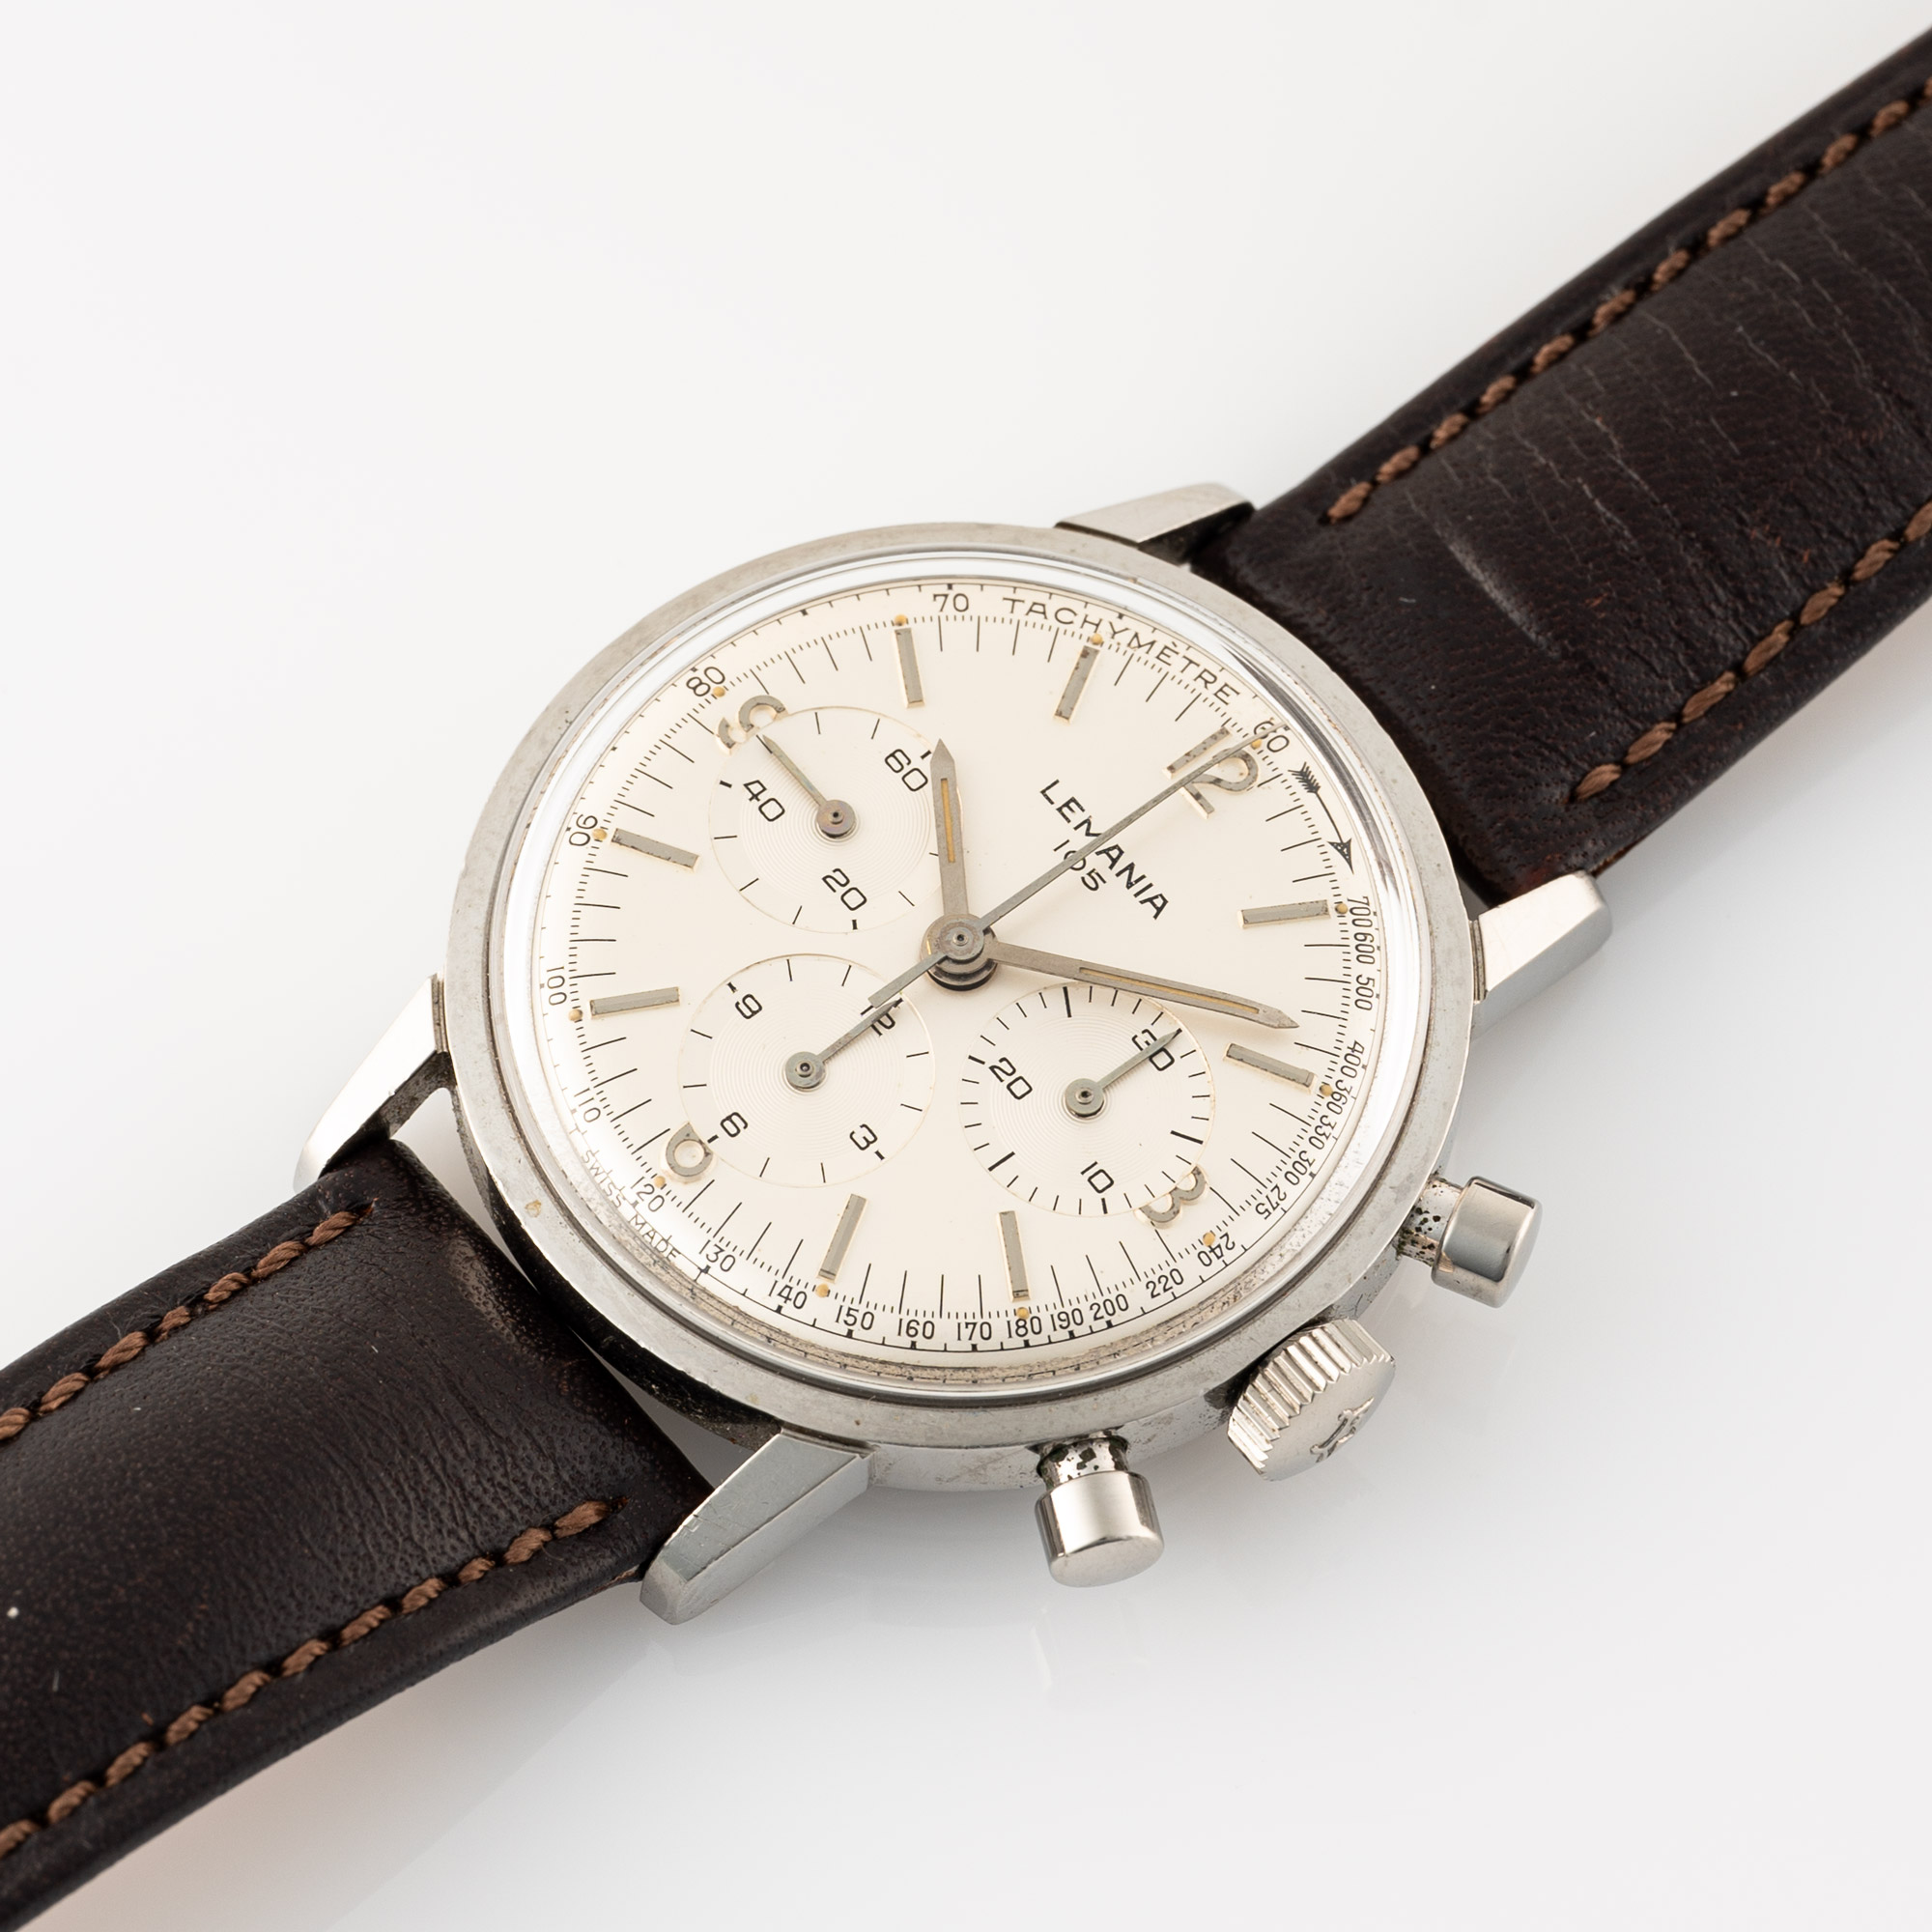 A RARE GENTLEMAN'S STAINLESS STEEL LEMANIA WATERPROOF CHRONOGRAPH WRIST WATCH CIRCA 1960s, ISSUED TO - Image 5 of 10